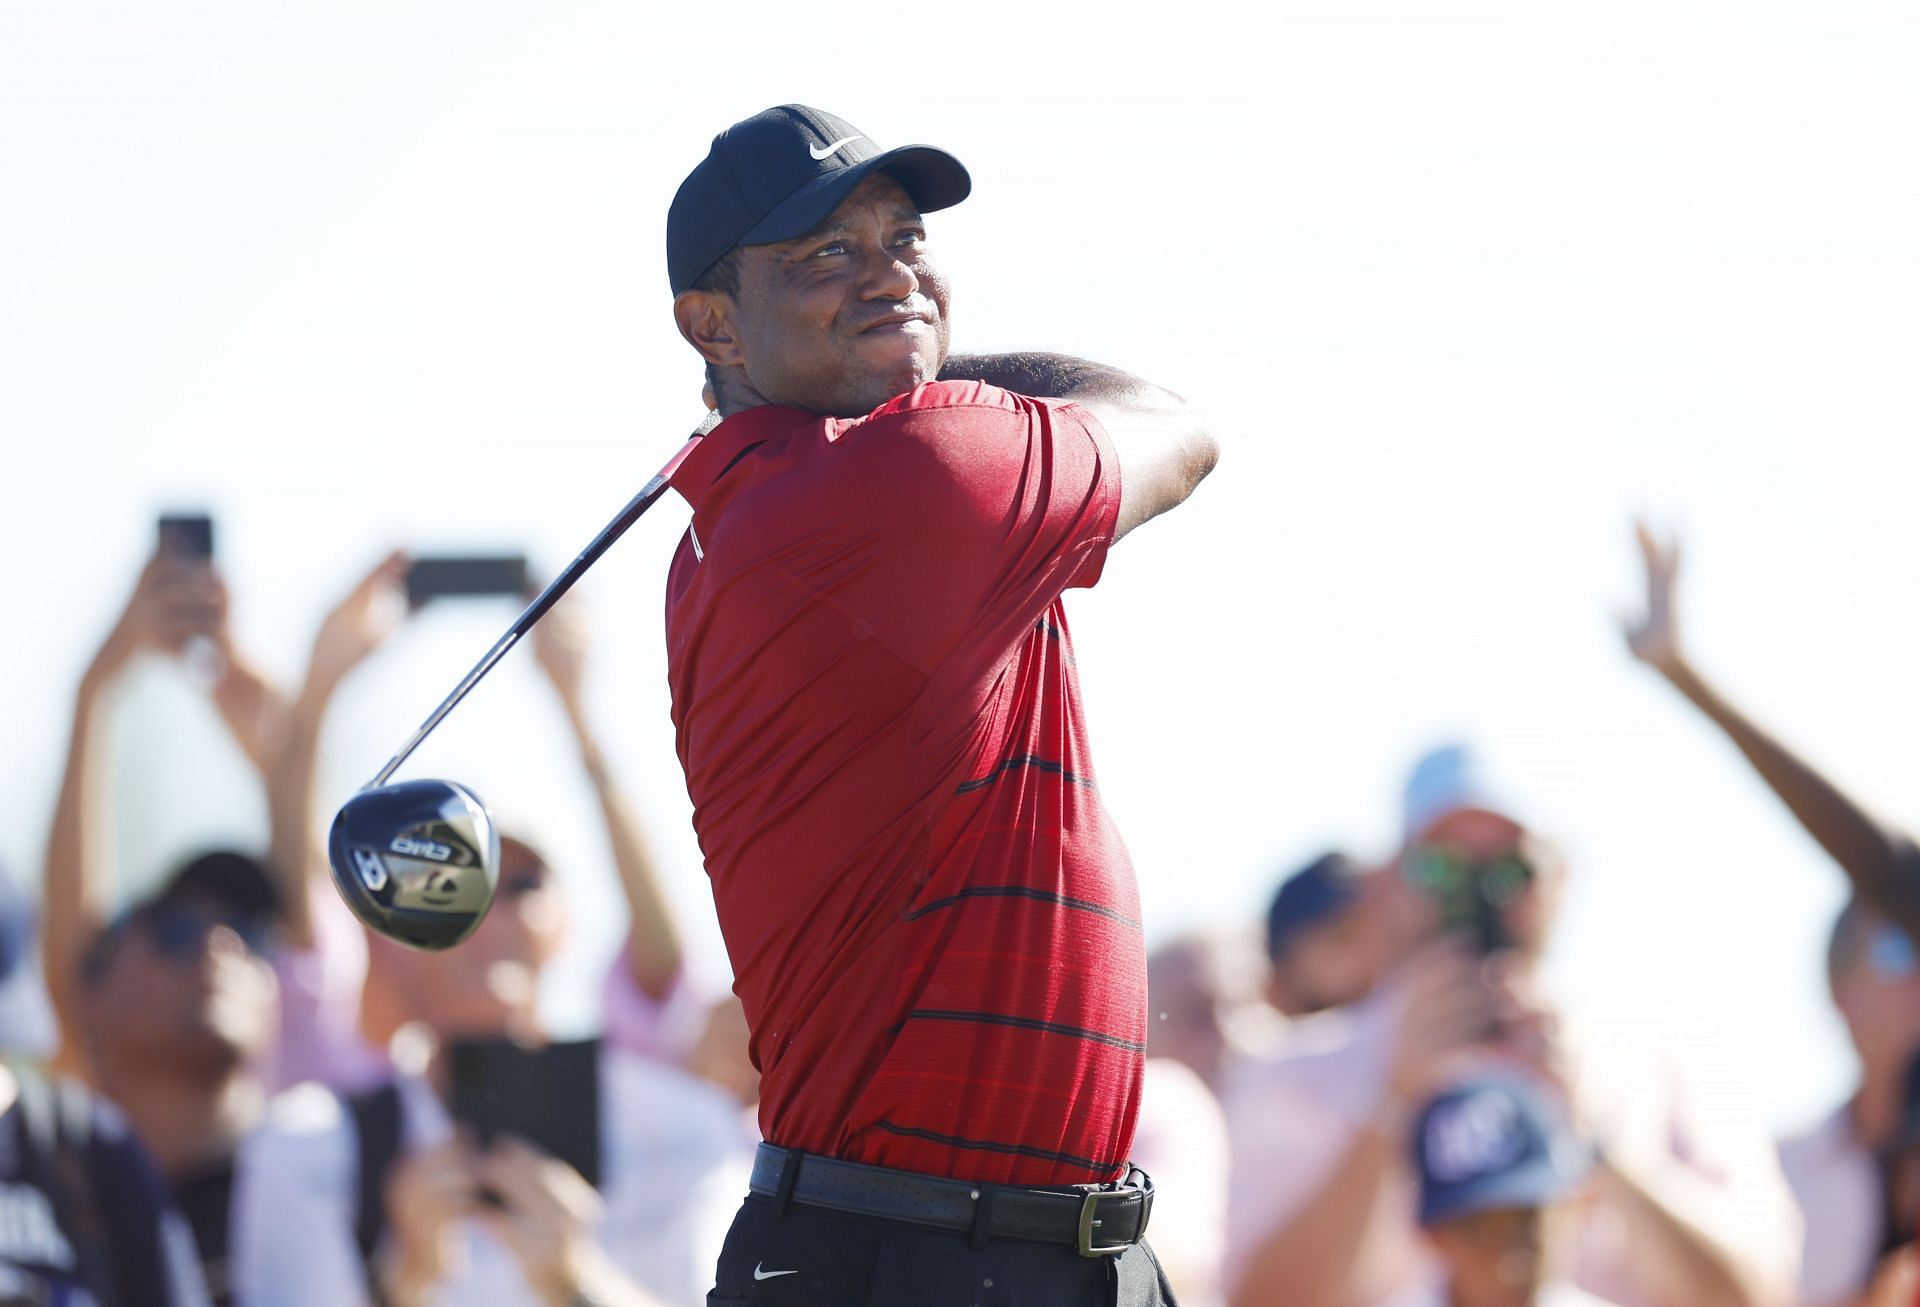 Tiger Woods at the Hero World Challenge - Final Round (Image via Getty)